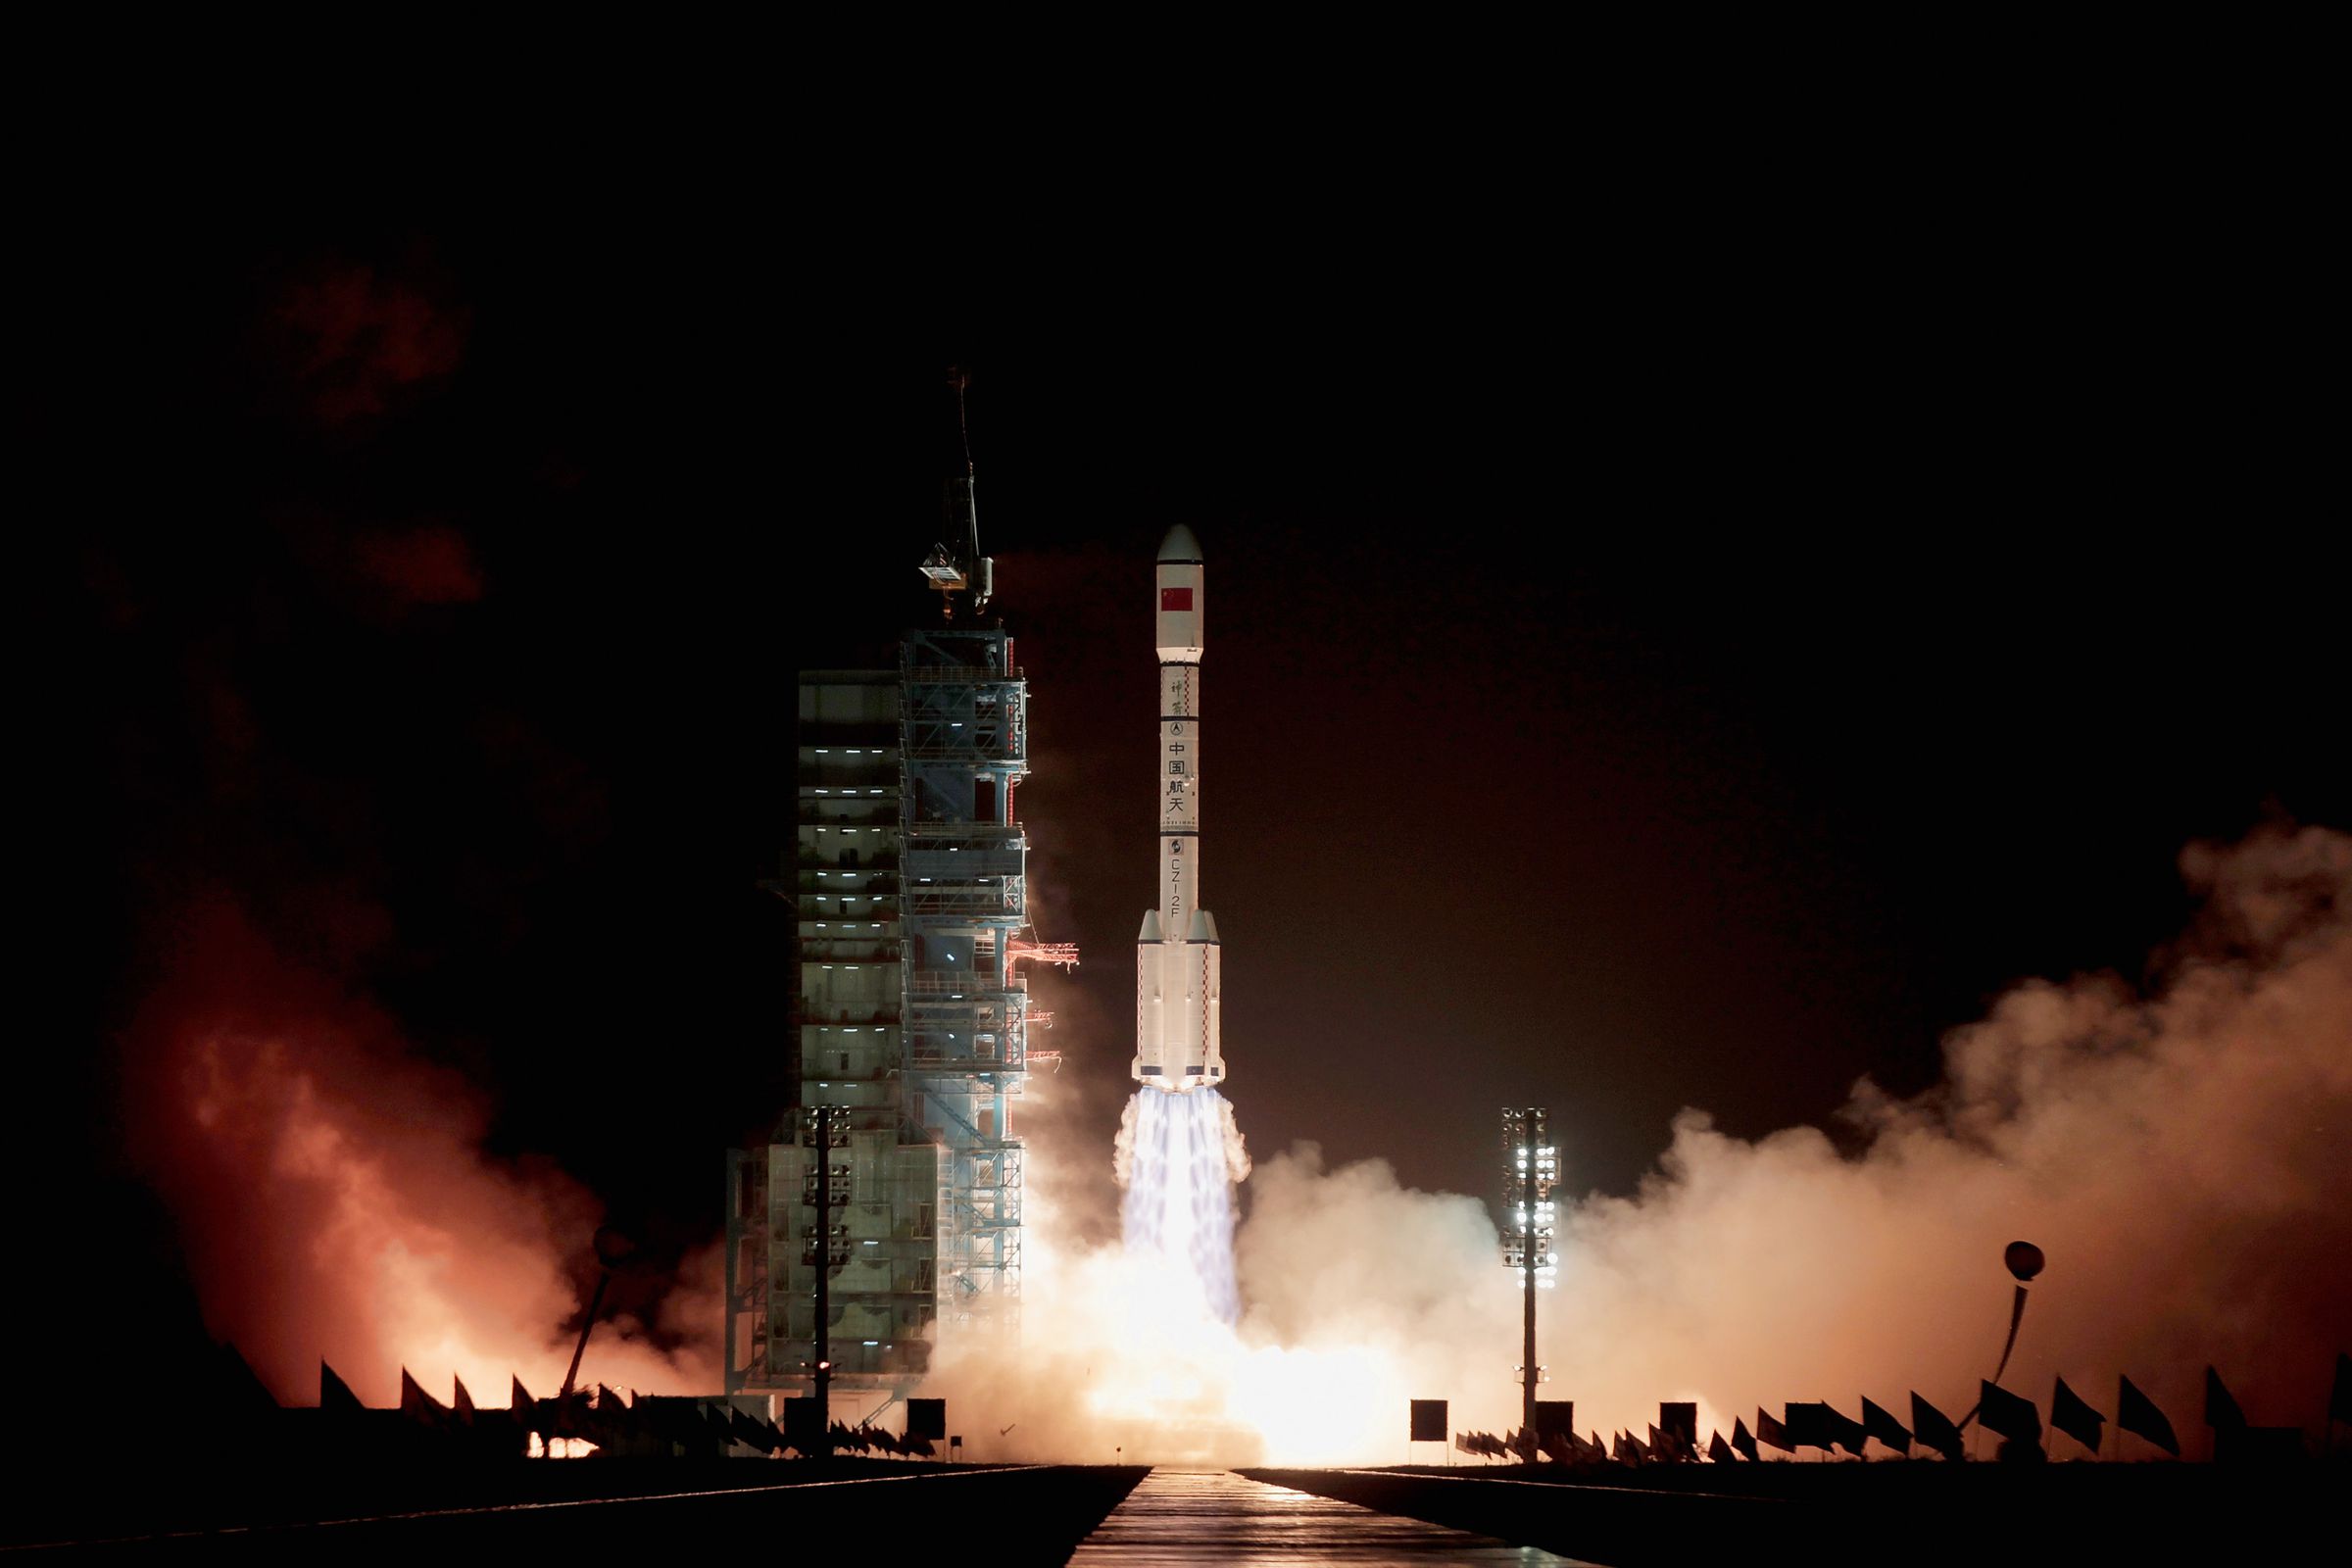 China Launches Its First Space Laboratory Module Tiangong-1